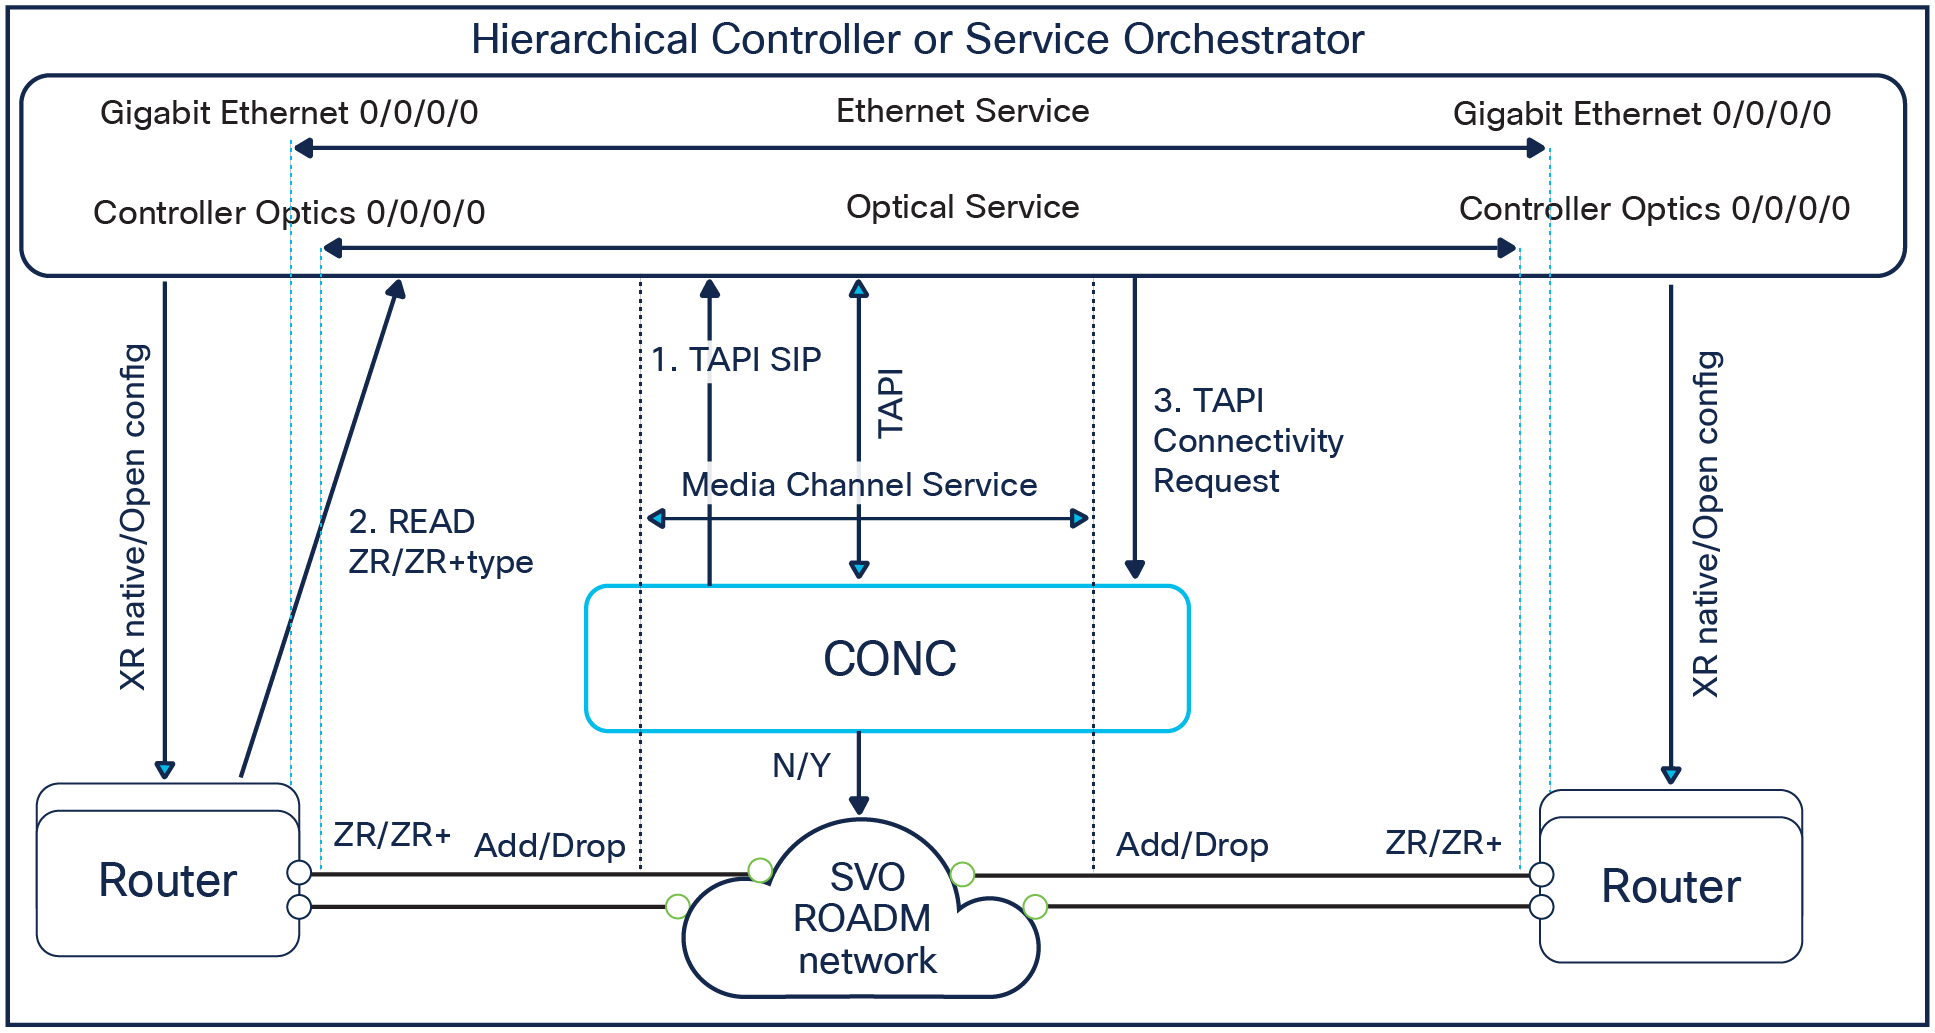 CONC 2.x (or later release) service provisioning with router-based ZR+ optics workflow